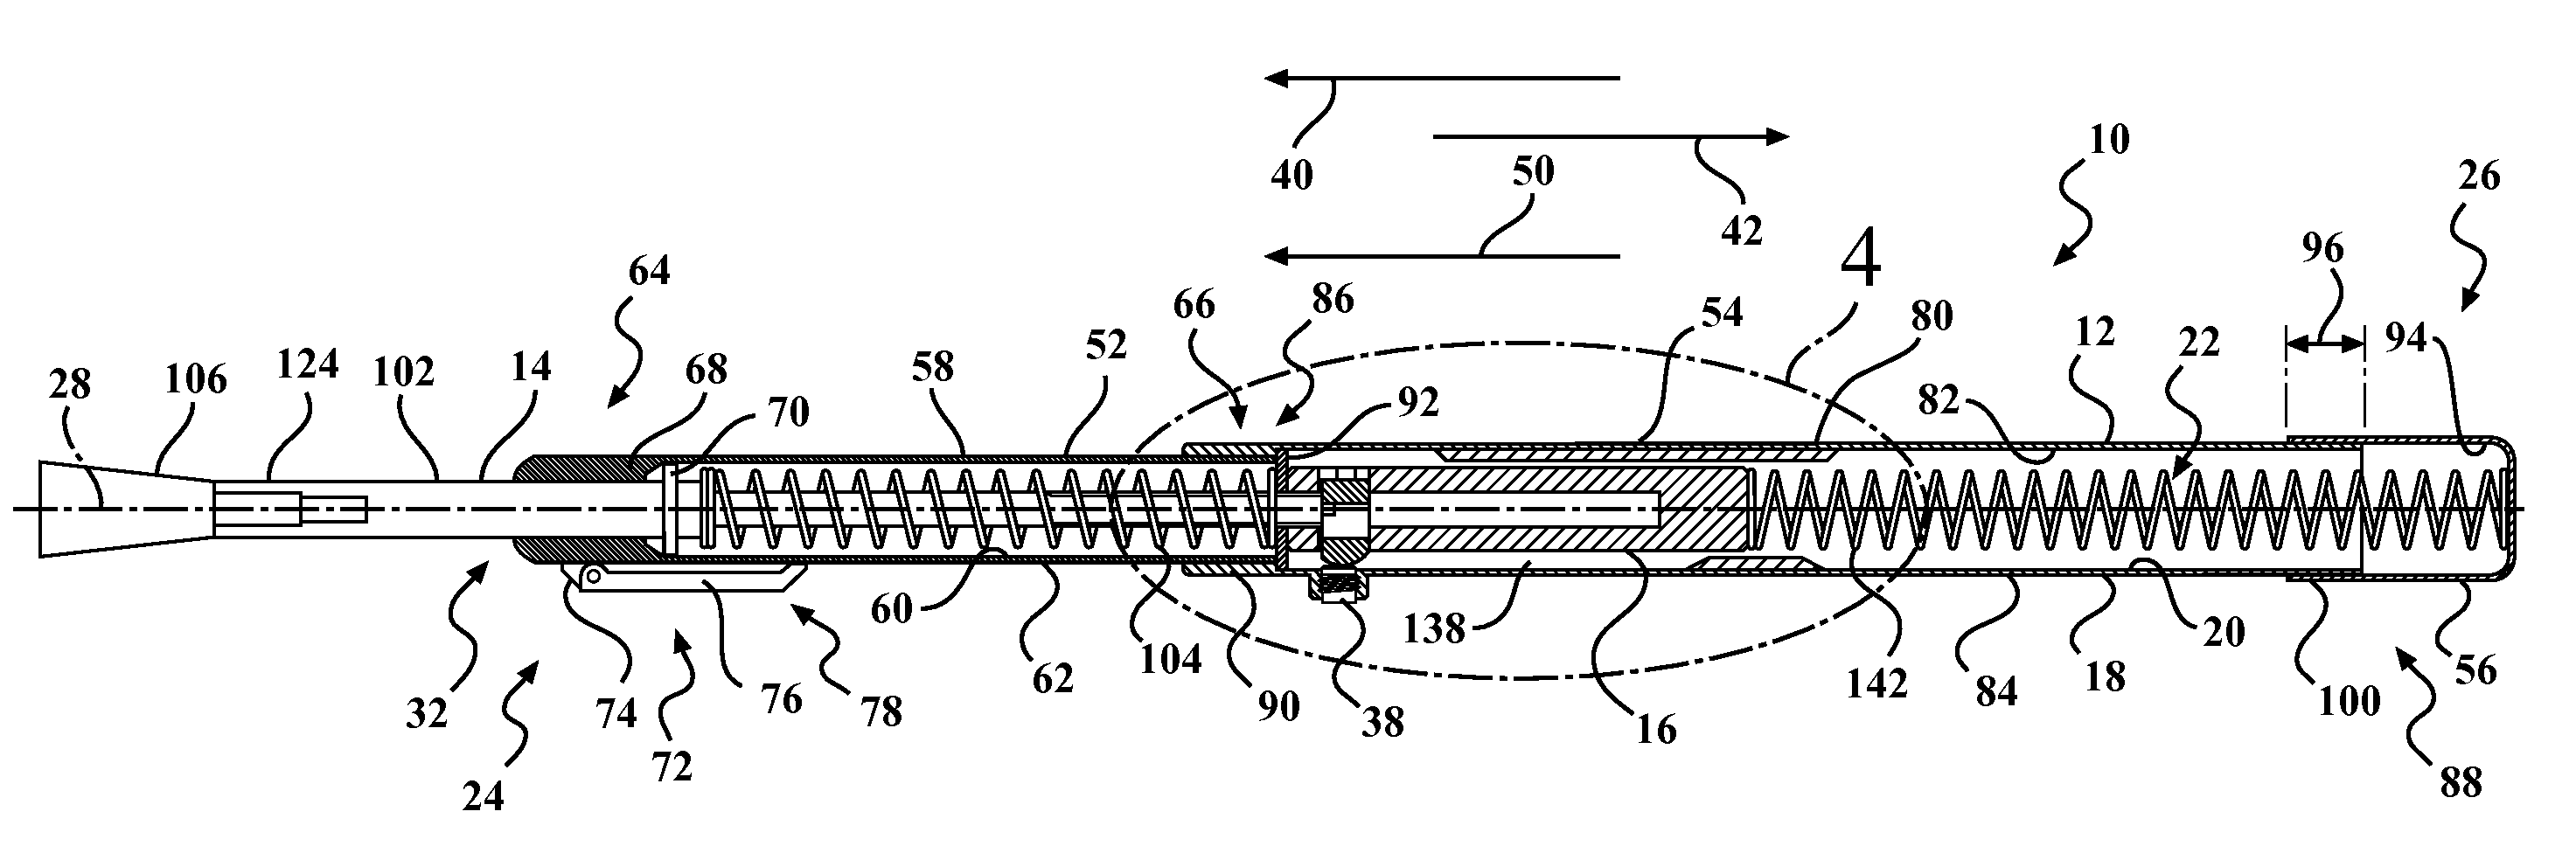 Impact tool assembly and method of assembling same